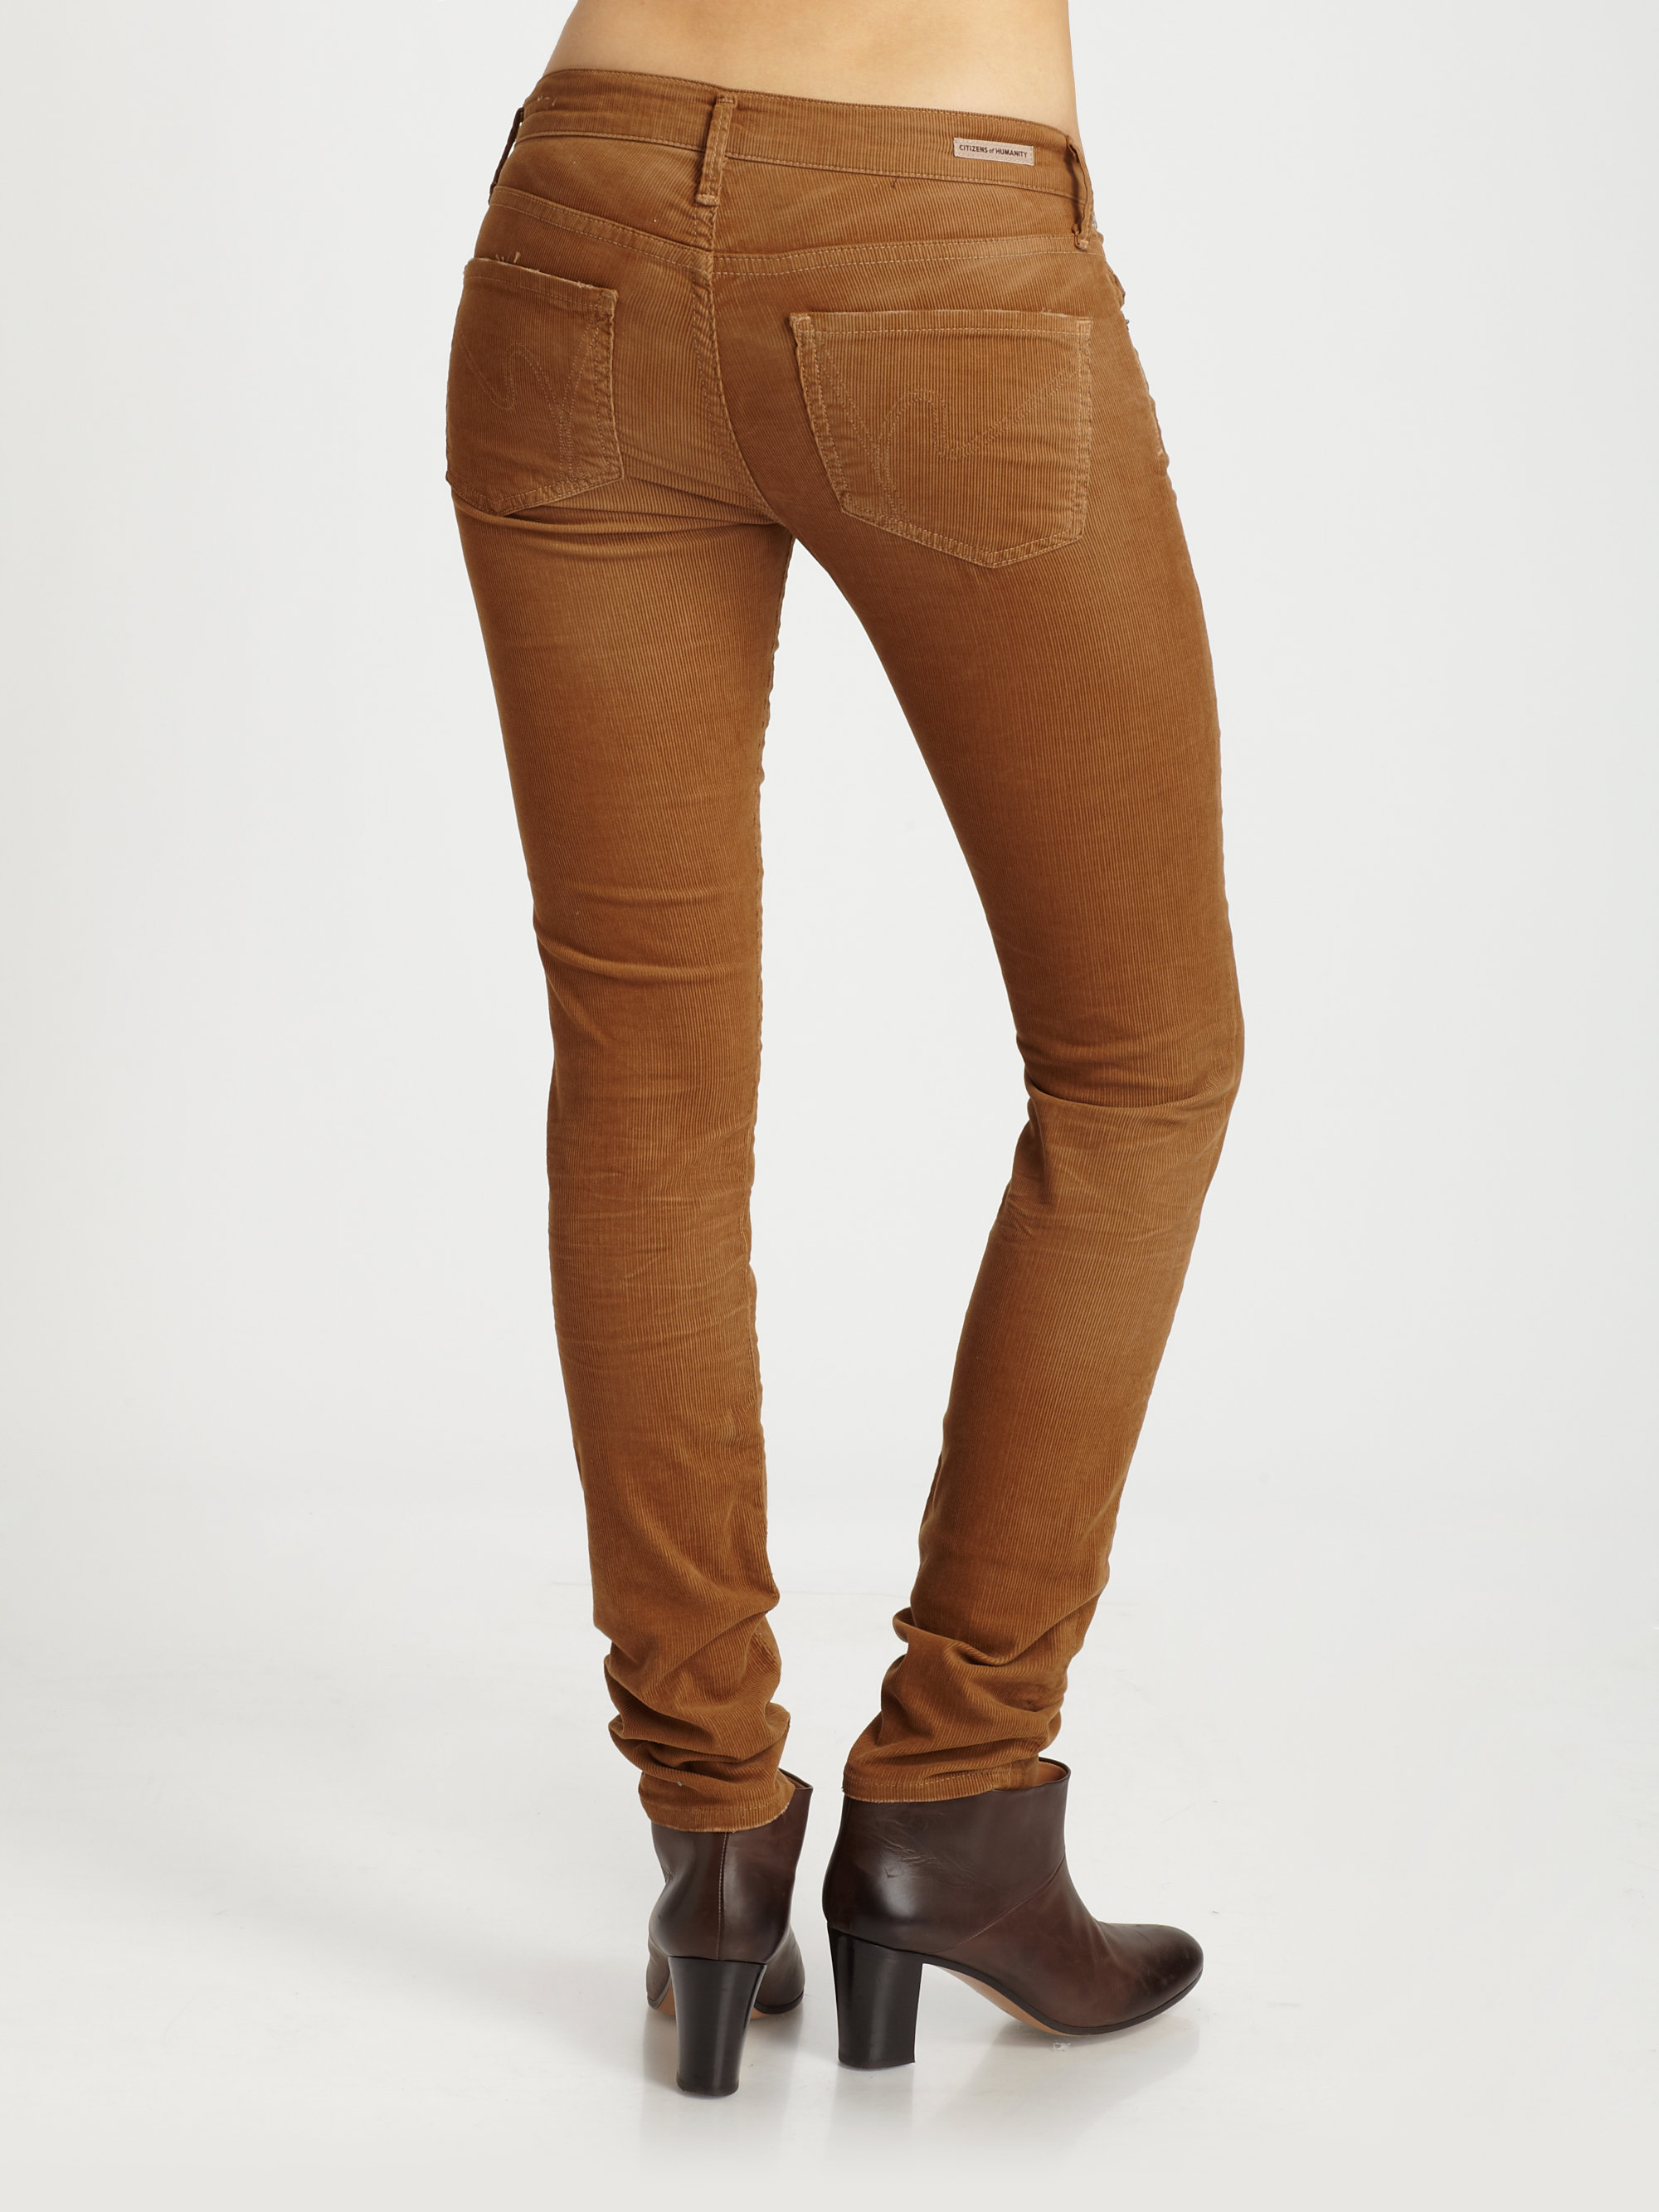 Citizens of Humanity Avedon Skinny Corduroy Pants in Brown - Lyst